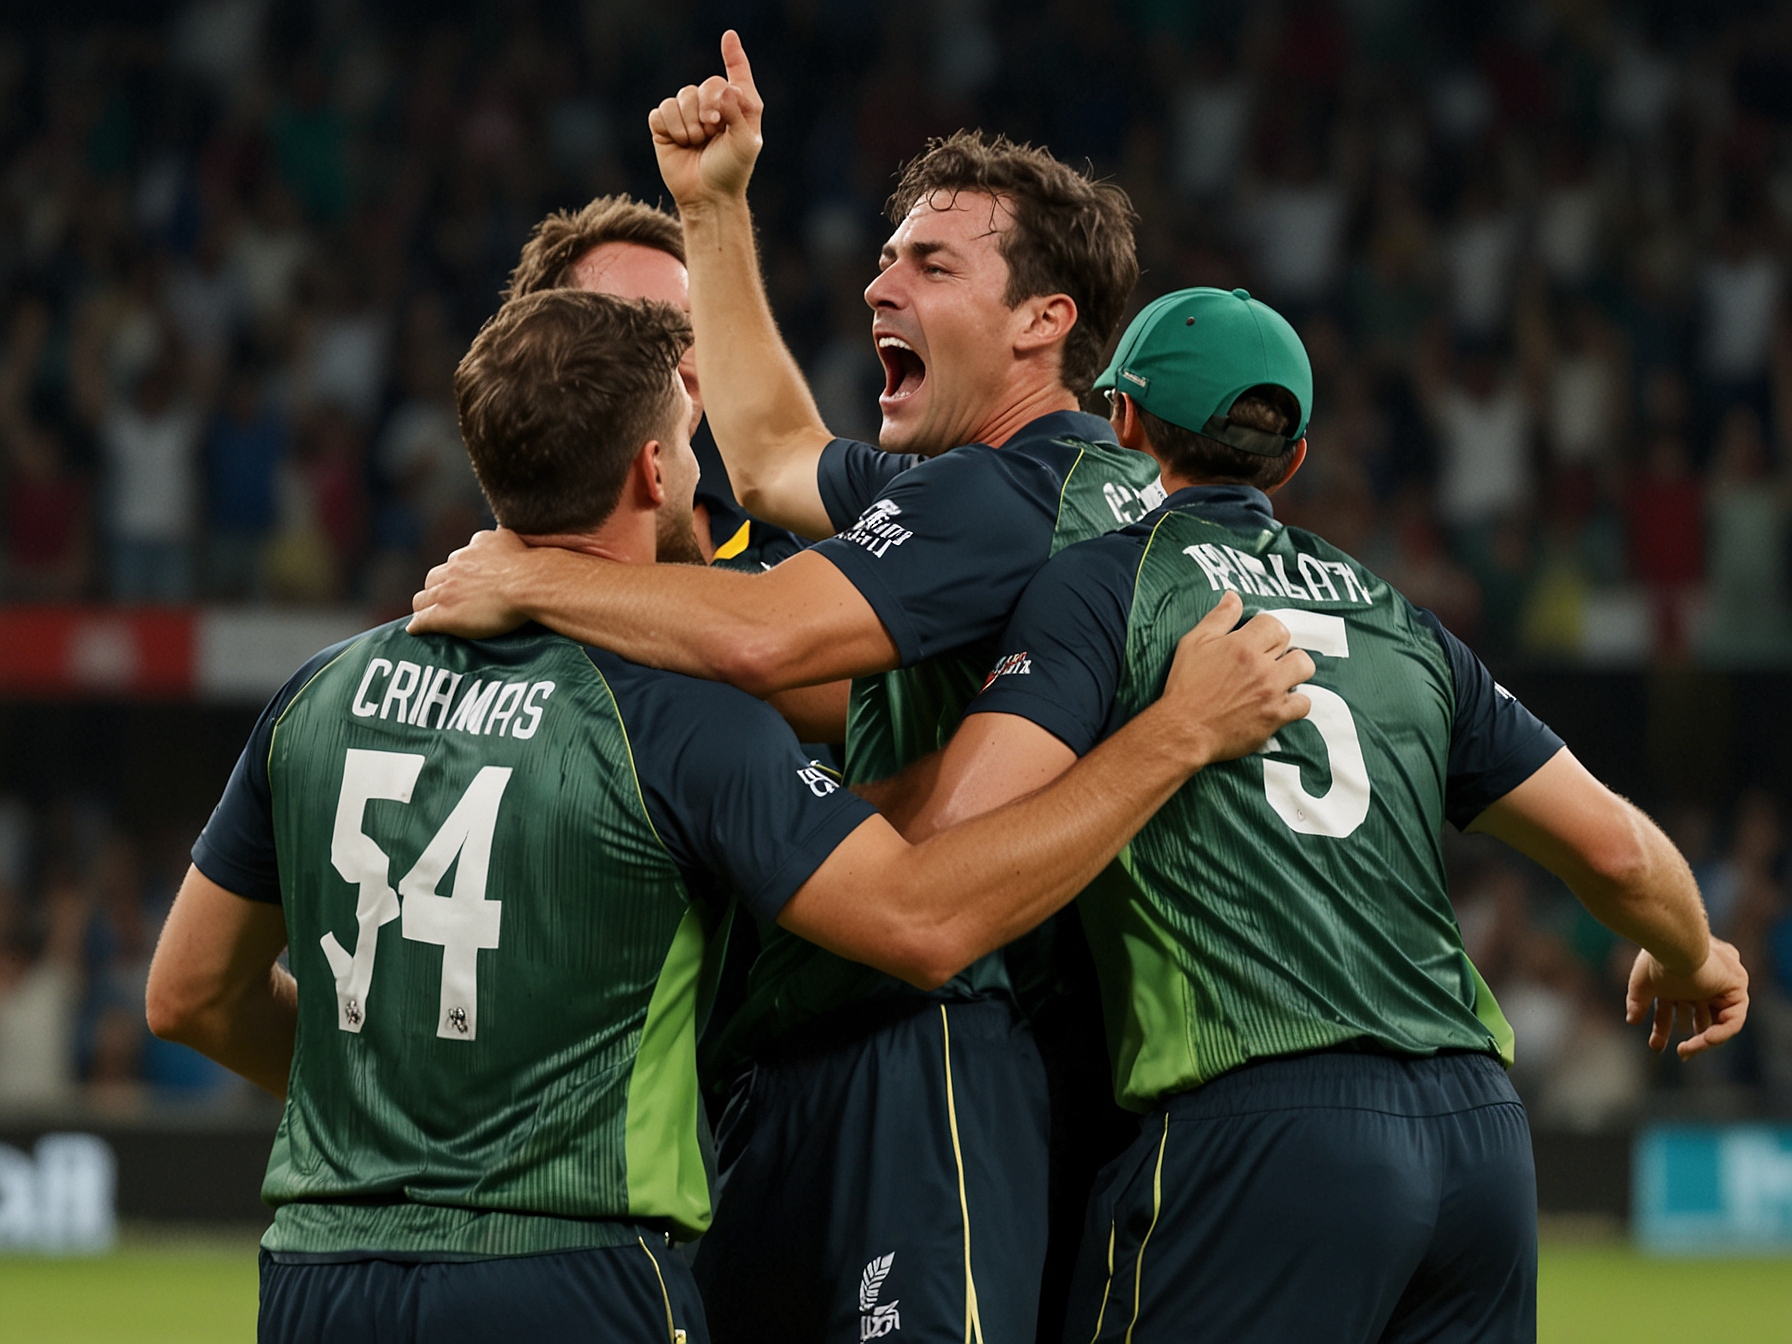 Pat Cummins celebrates with teammates after securing a hat-trick against Bangladesh in the T20 World Cup. The crowd erupts in joy as Cummins marks this exceptional achievement.